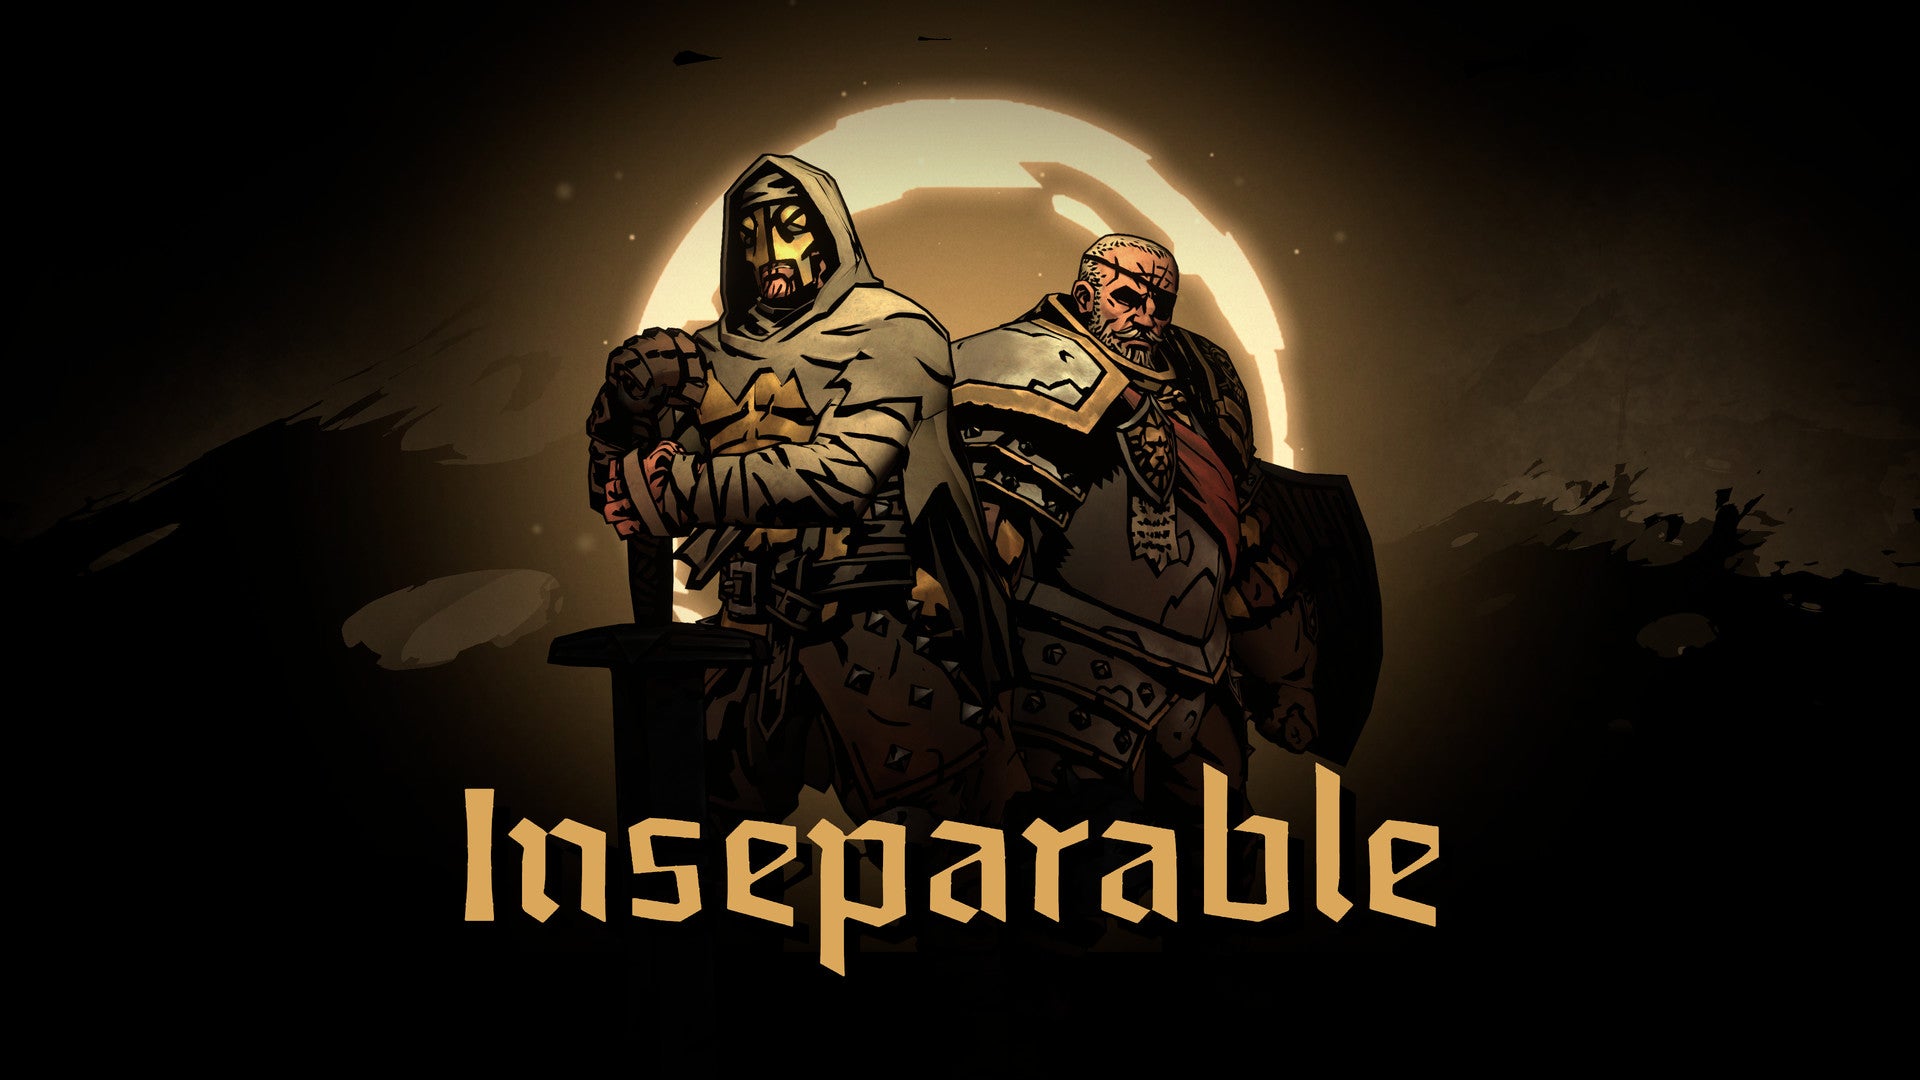 Darkest Dungeon 2 friendship system in play, with two characters becoming inseperable.